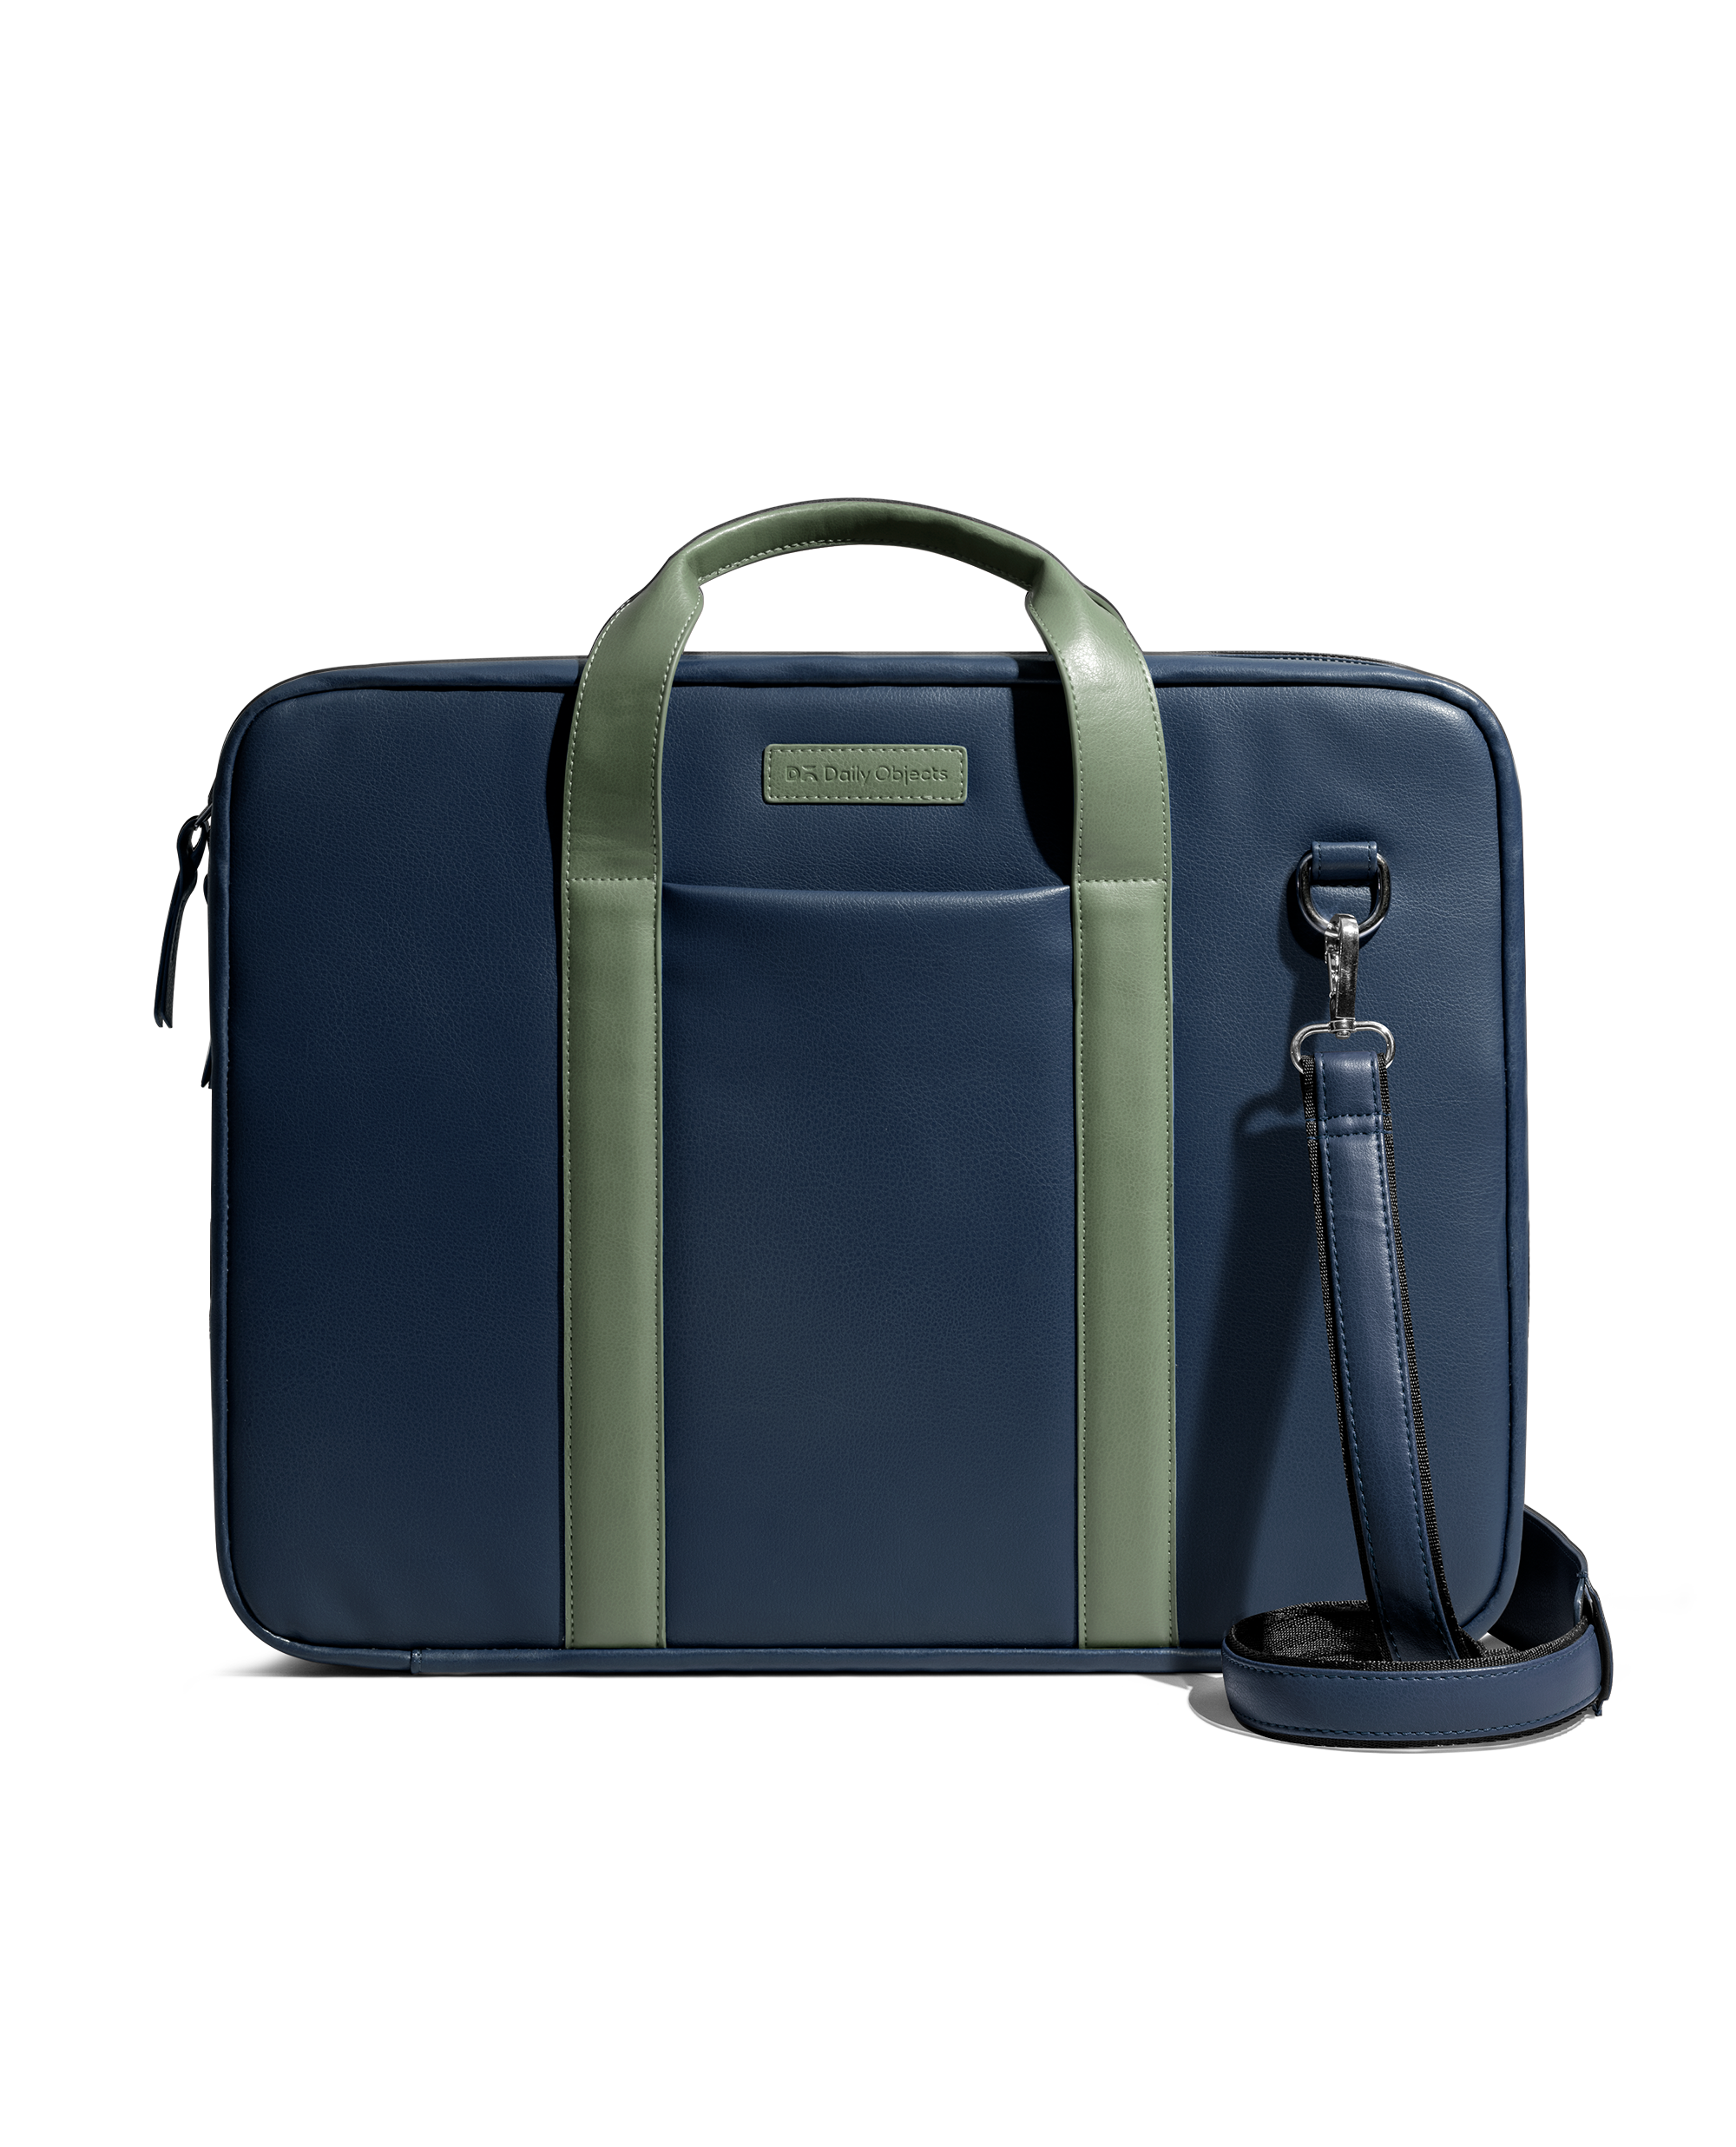 URBAN GEAR - Weekender - Overnighter Business Bag with Padded laptop c –  MojoLife